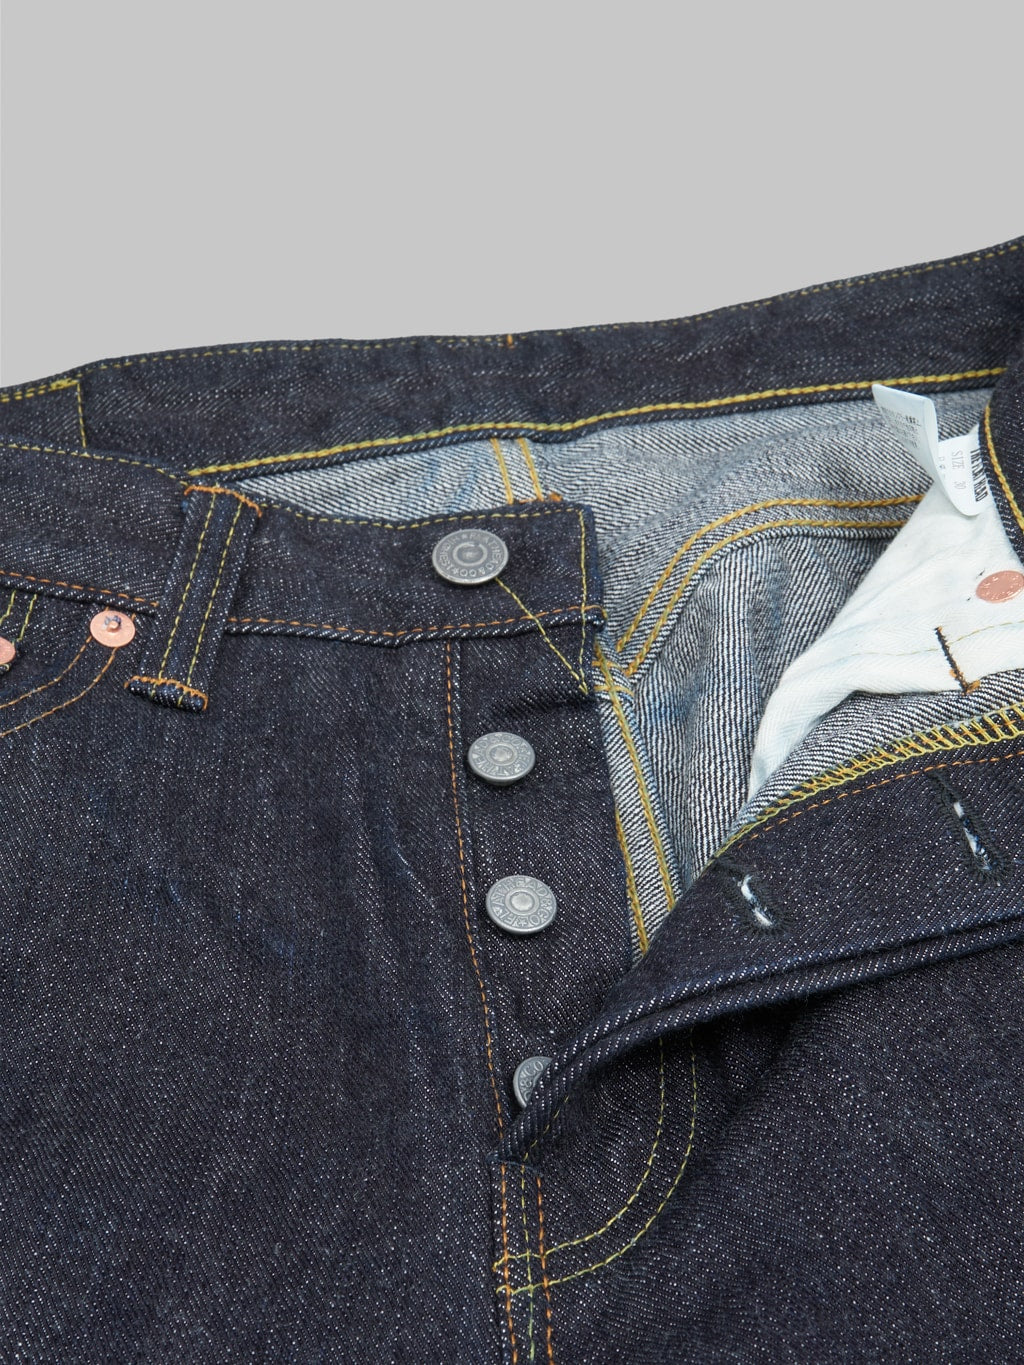 the flat head fn d111 wide straight selvedge denim jeans  buttons